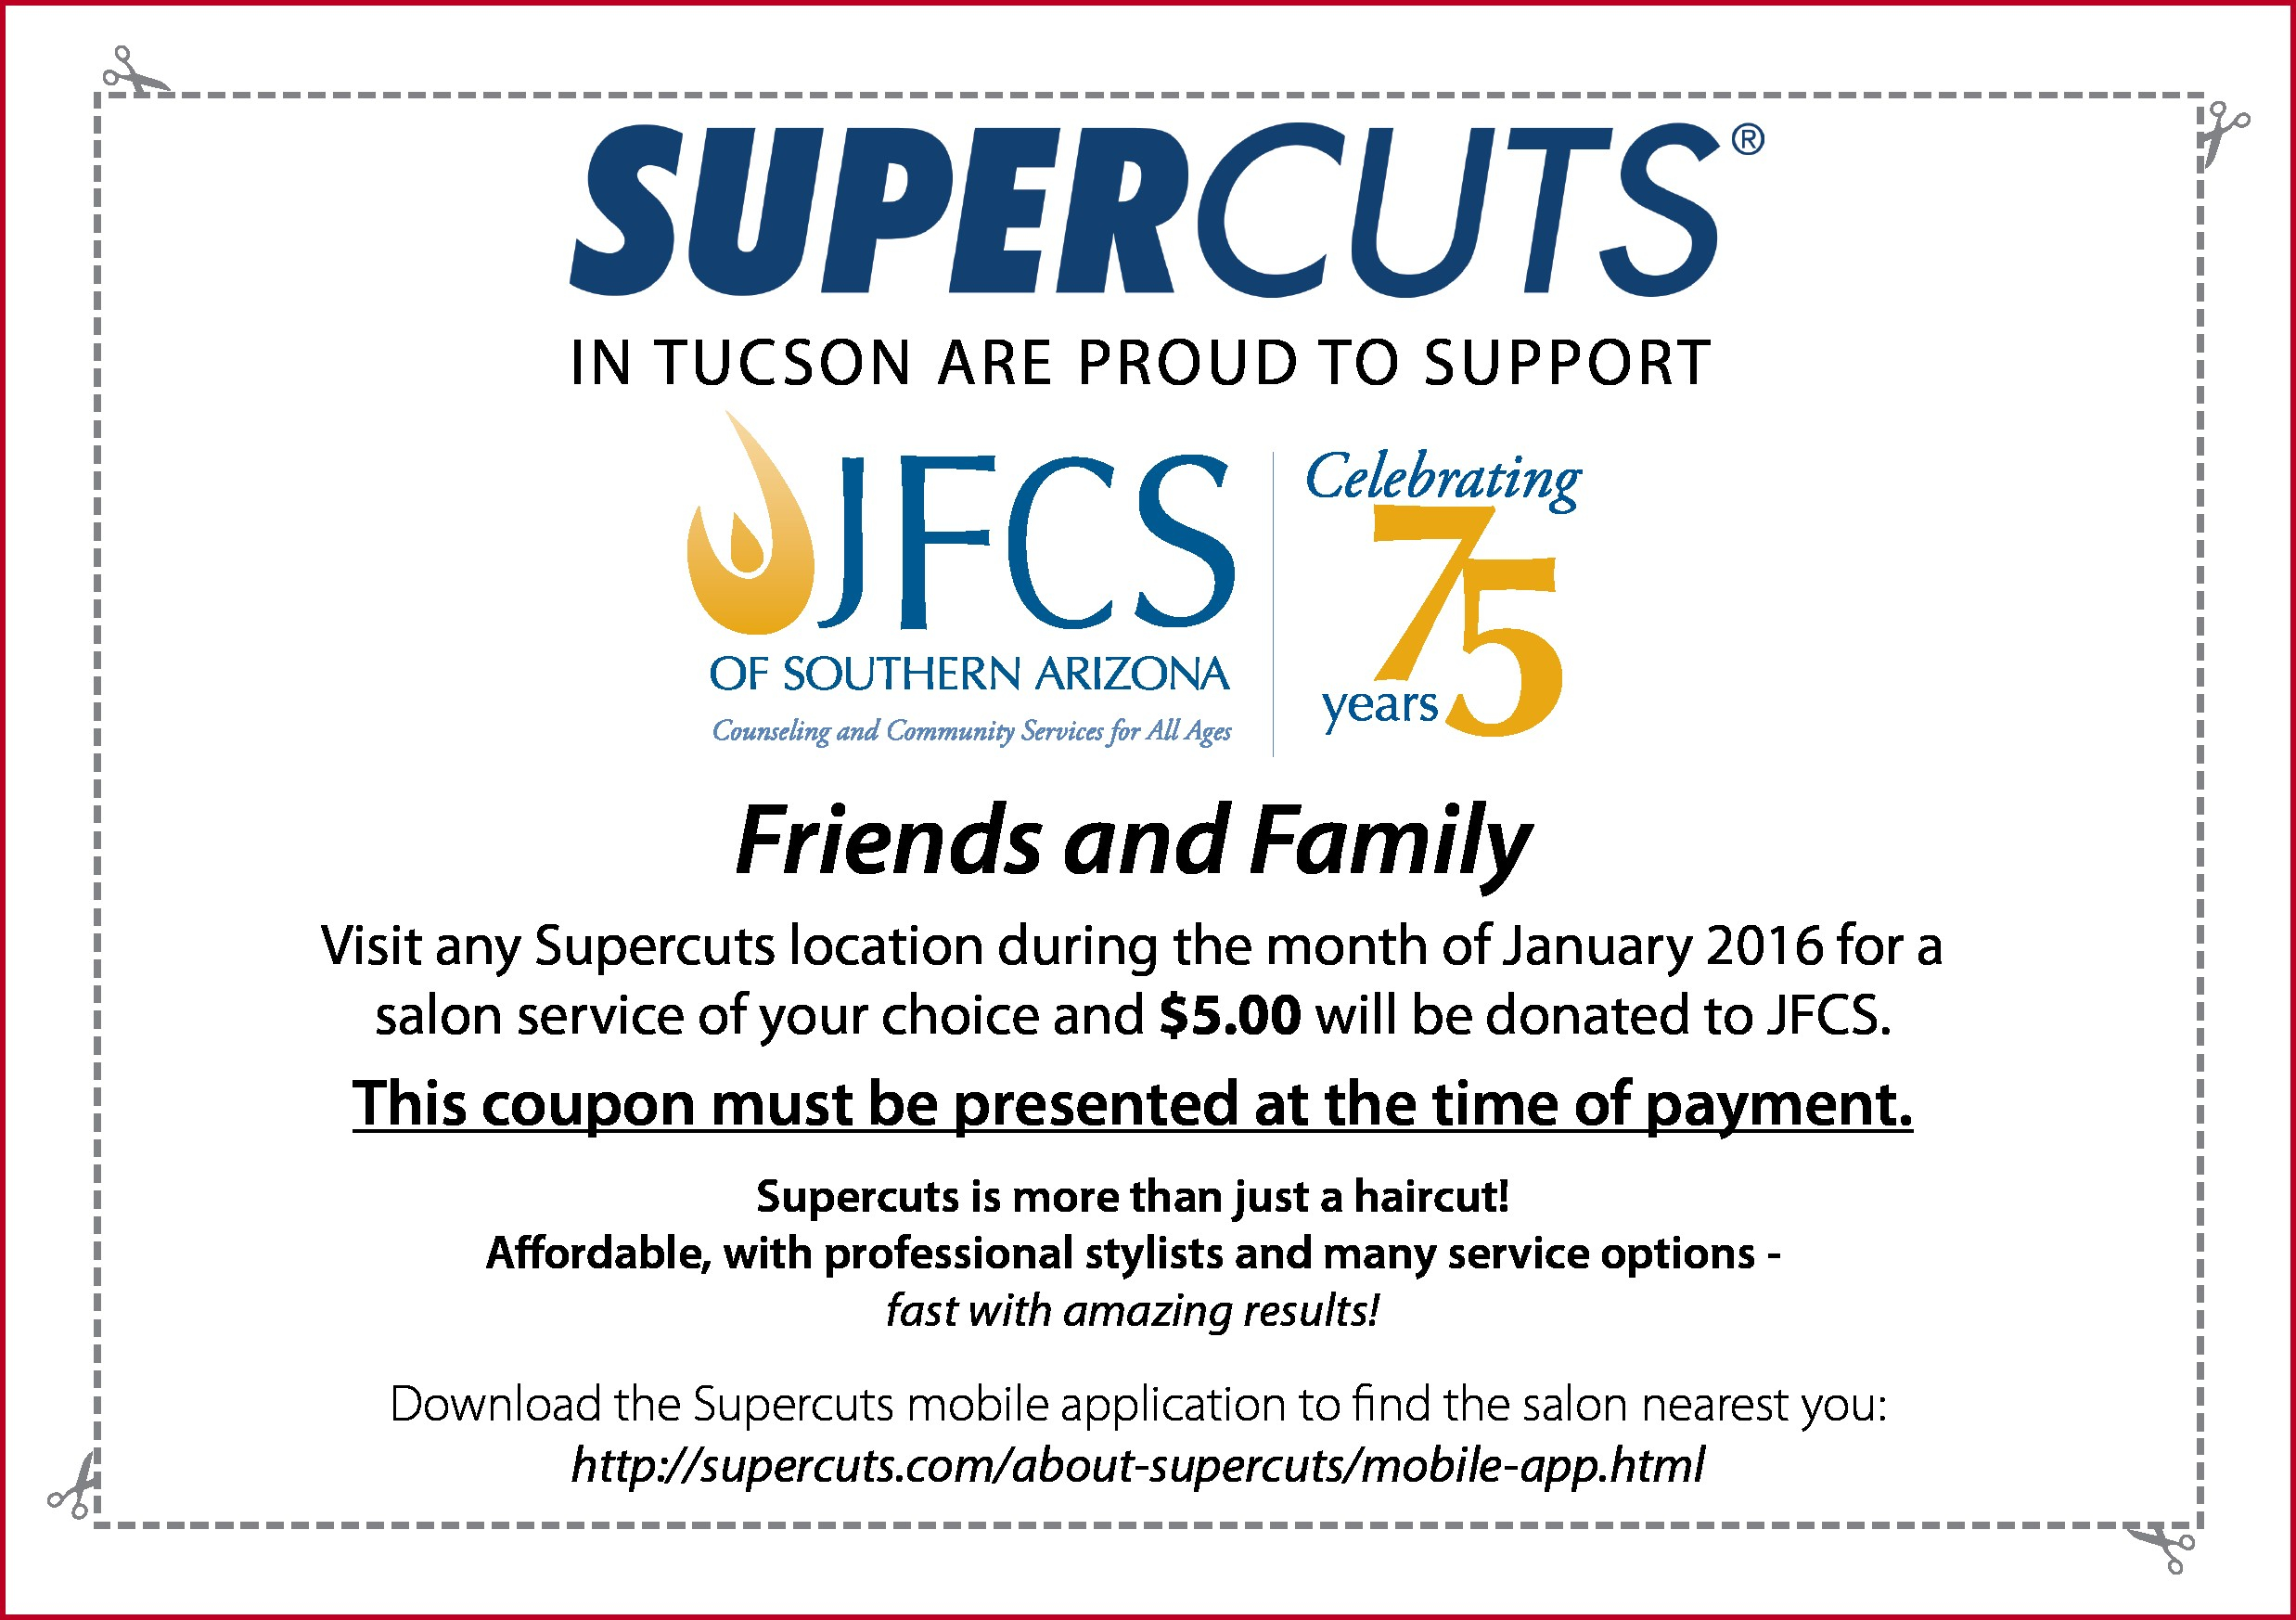 Supercuts Coupon $5 Off Haircut (92+ Images In Collection) Page 2 - Supercuts Free Haircut Printable Coupon